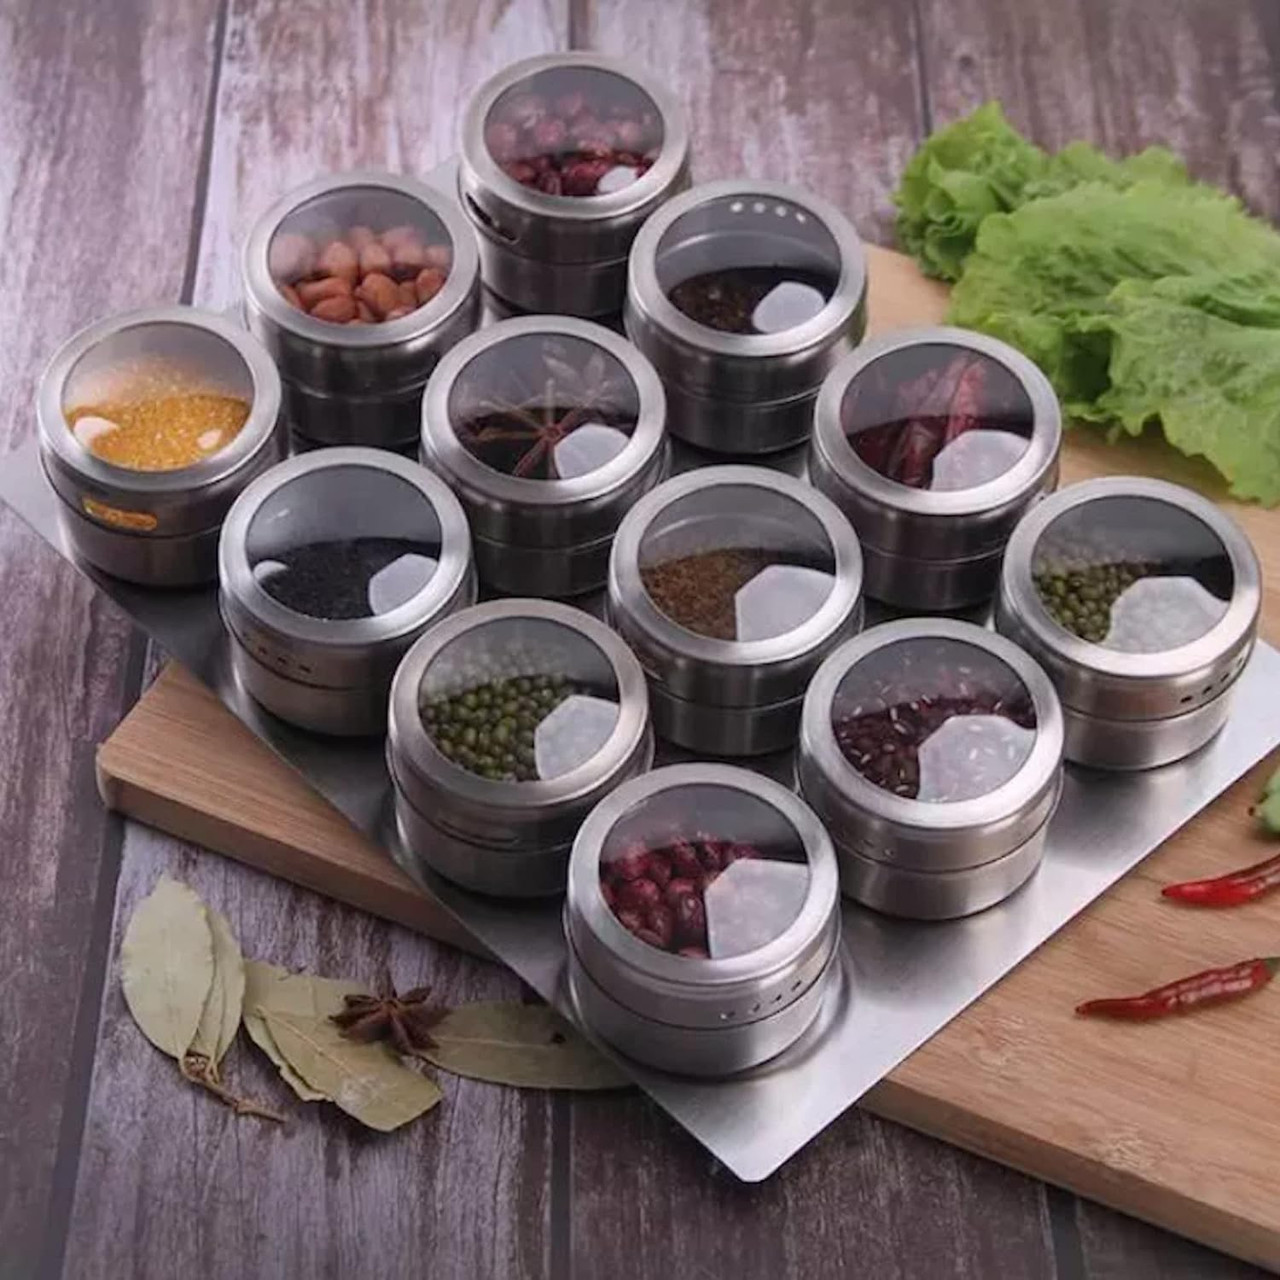 12 Magnetic Spice Jars w/ Window Top & Sift-Pour | Spice Storage Containers, Magnetic Seasoning Tin for Refrigerators, Fridges and Cabinets